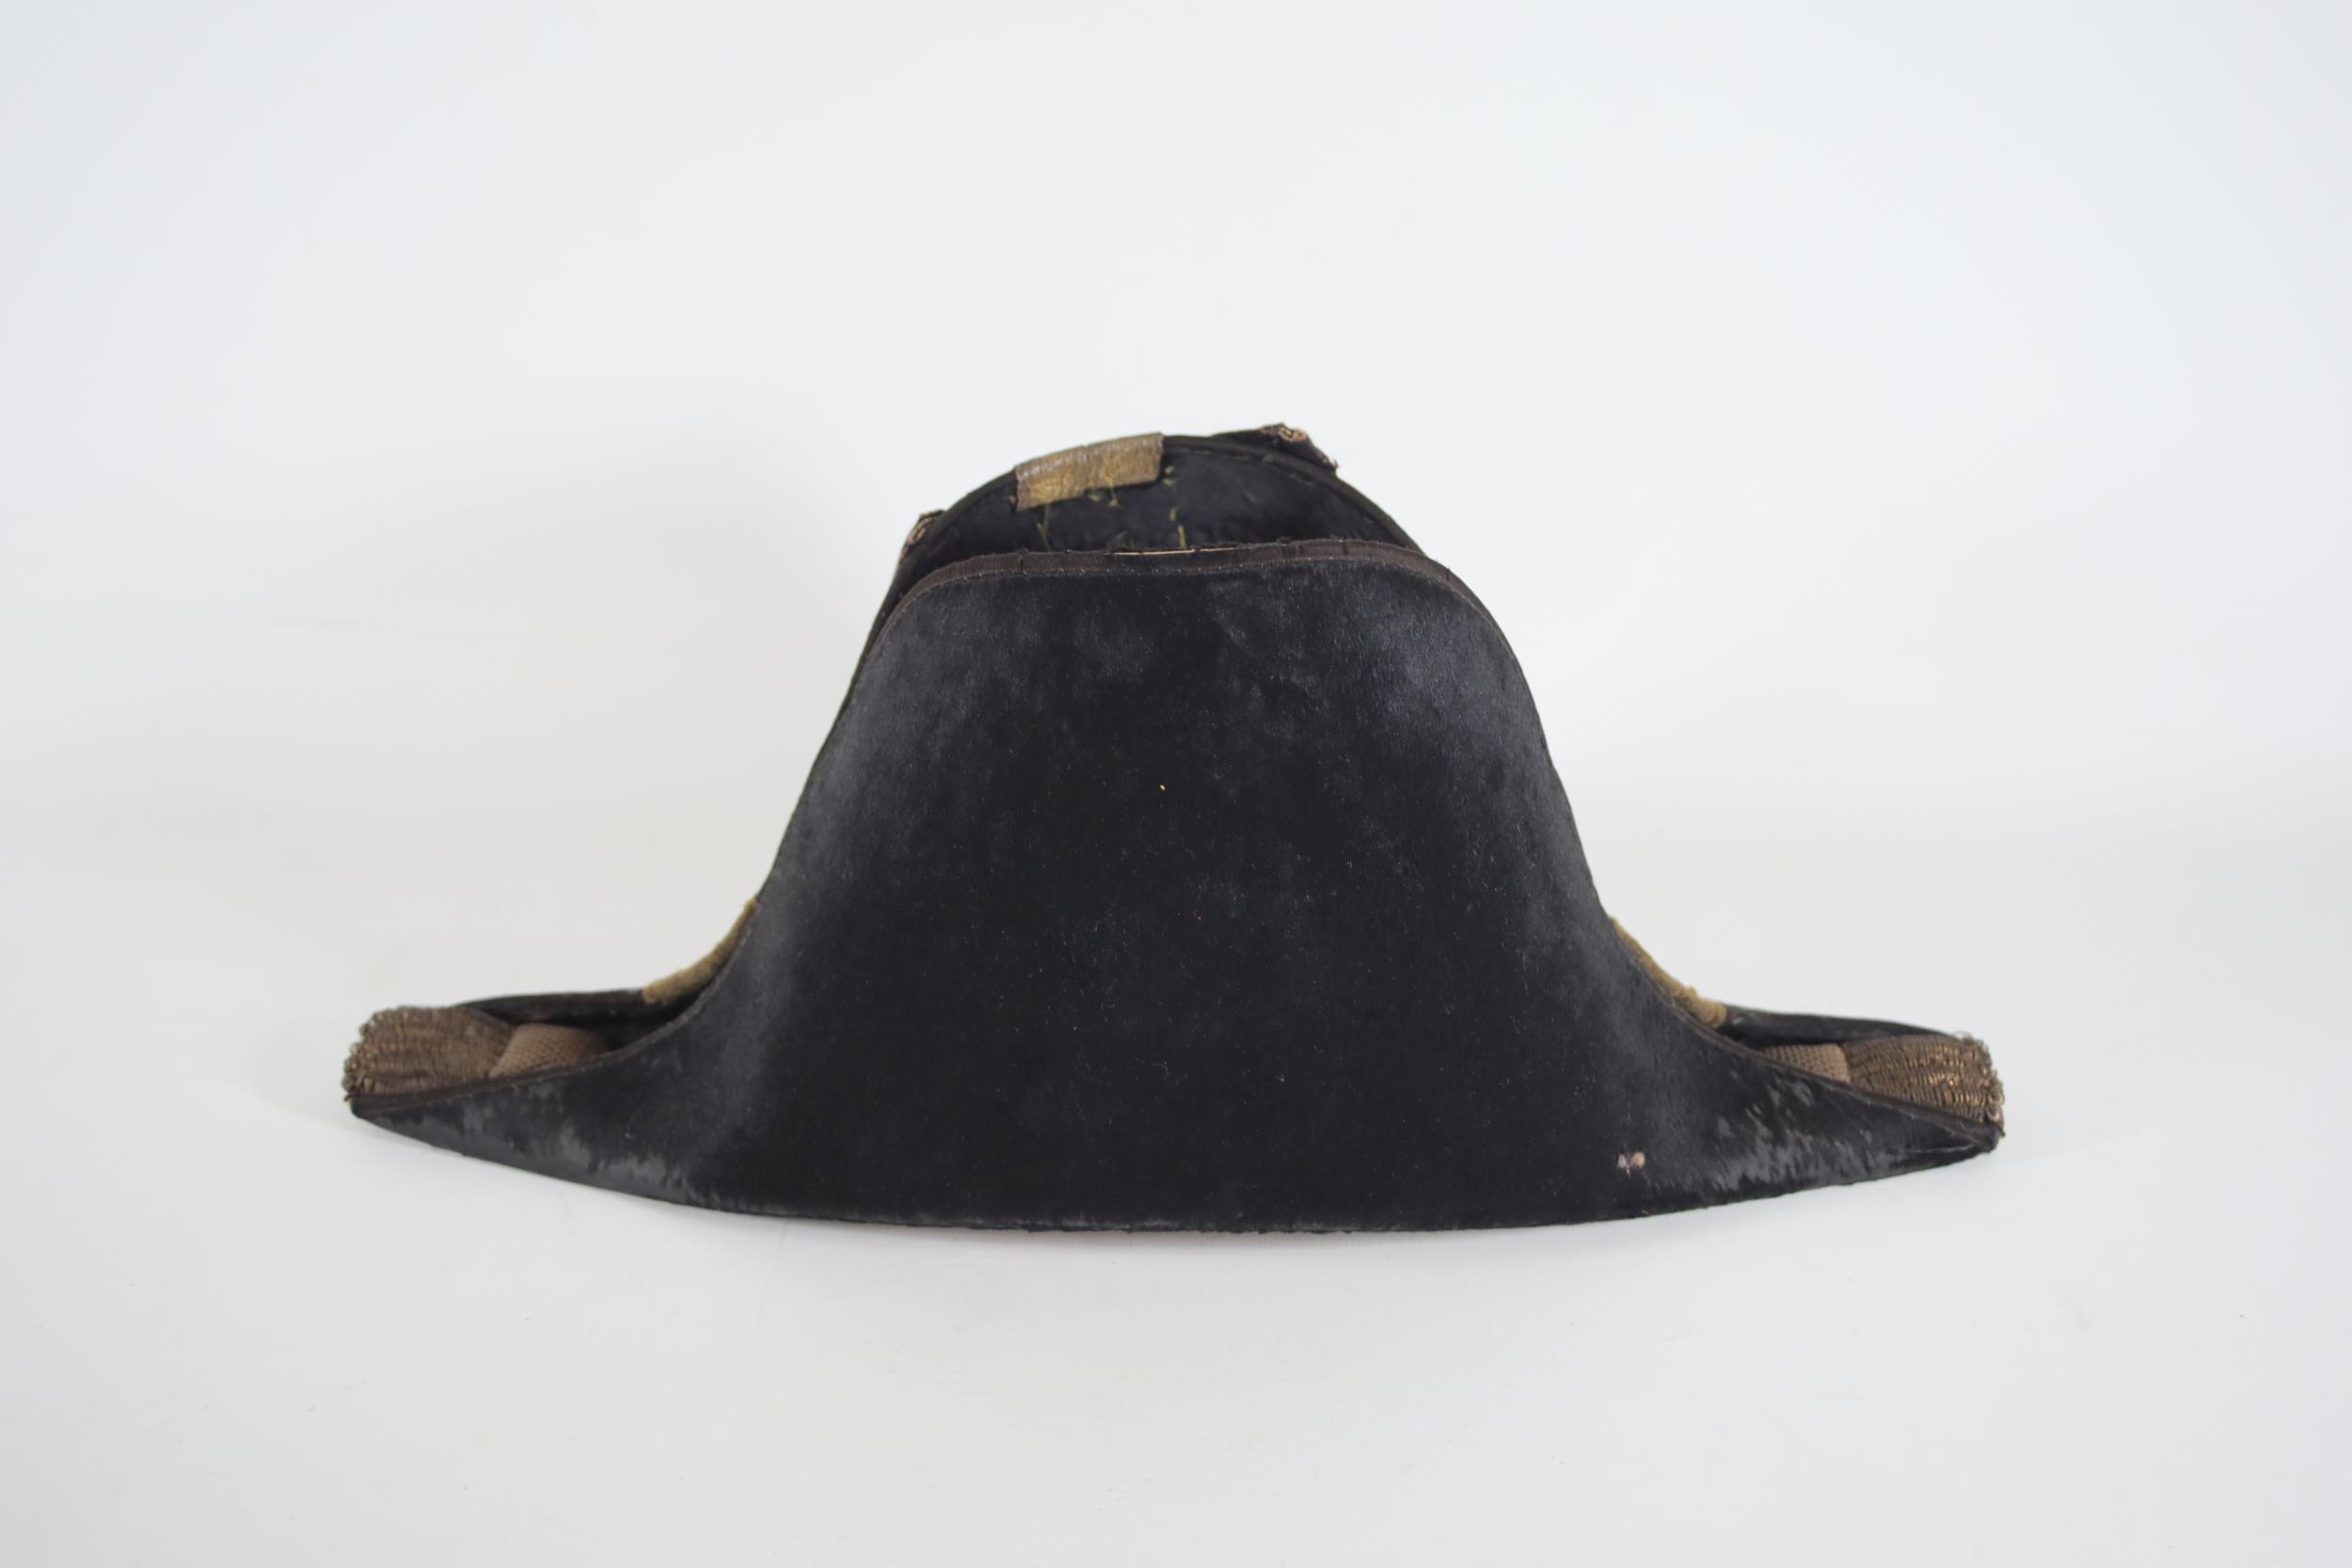 Antique bicorn hat and case naval circa 19th to early 20th century - Image 4 of 8